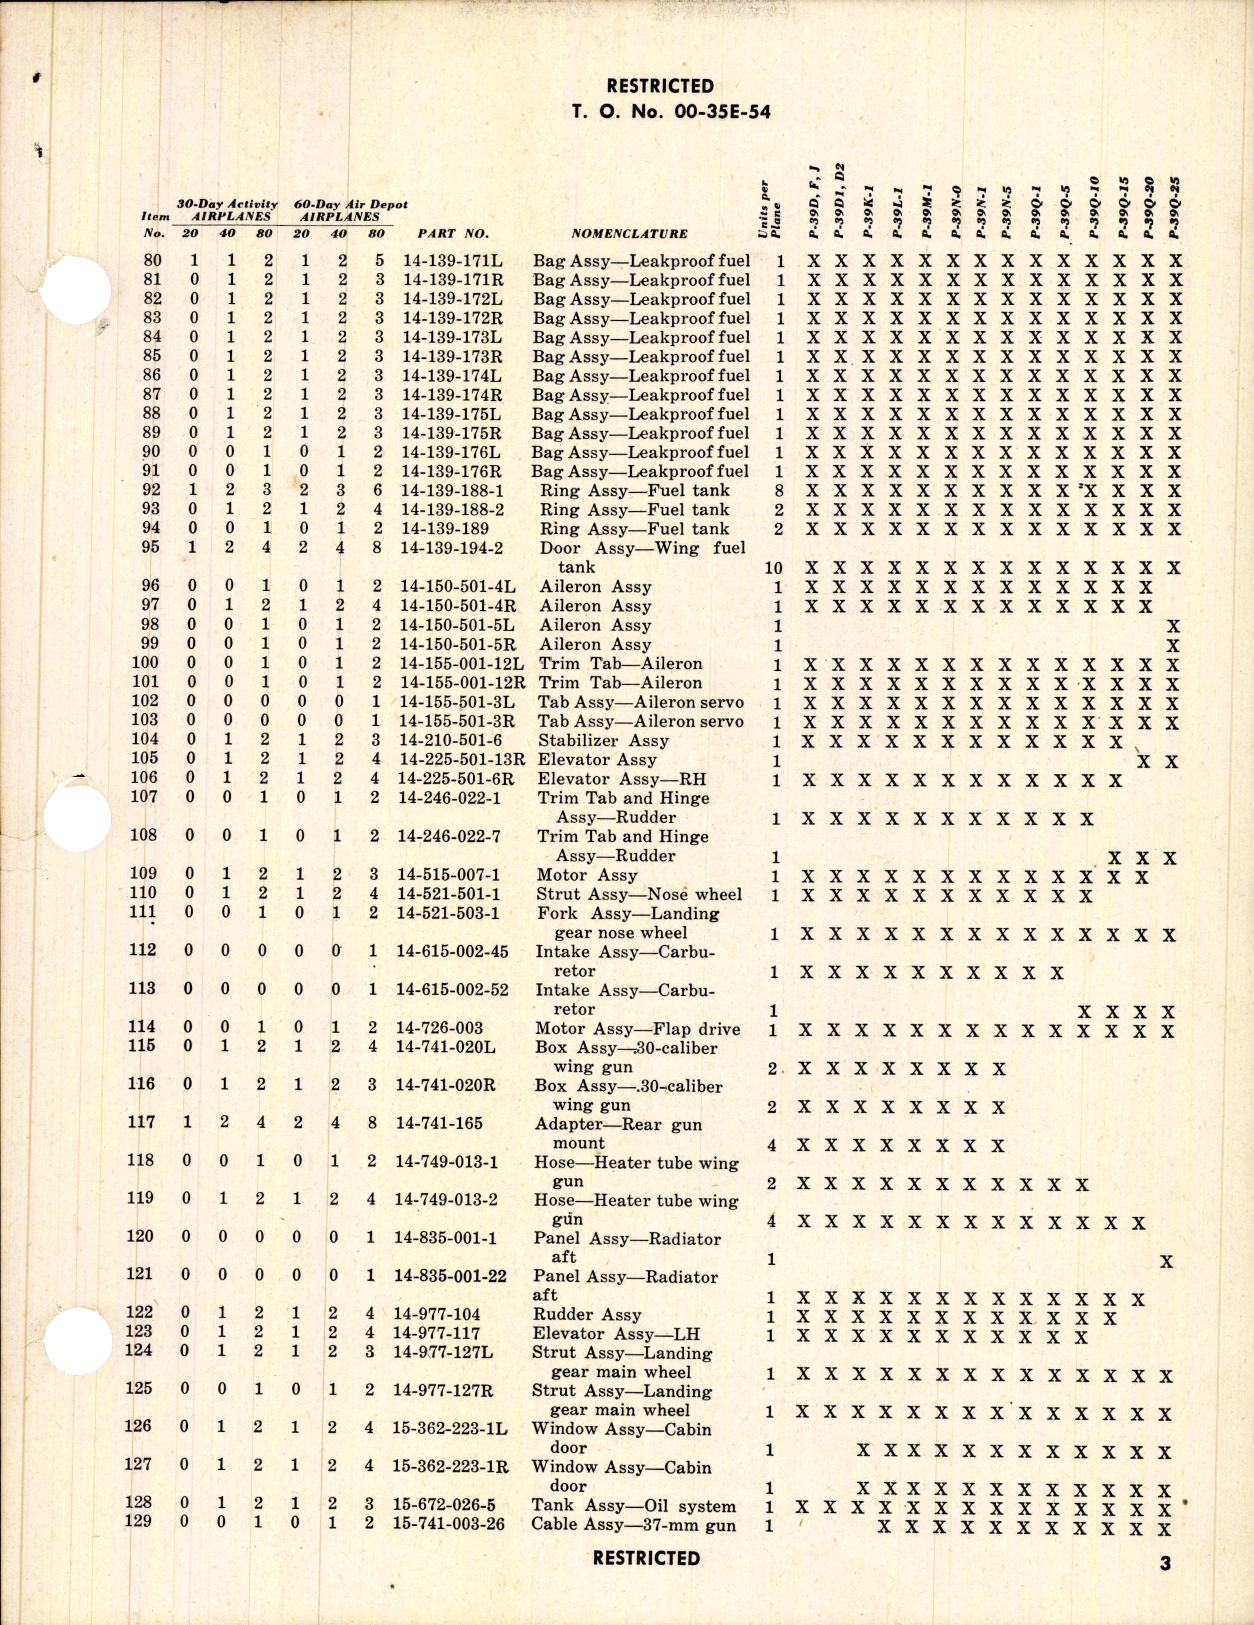 Sample page 5 from AirCorps Library document: Table of Credit Aircraft Maintenance Parts for P-39